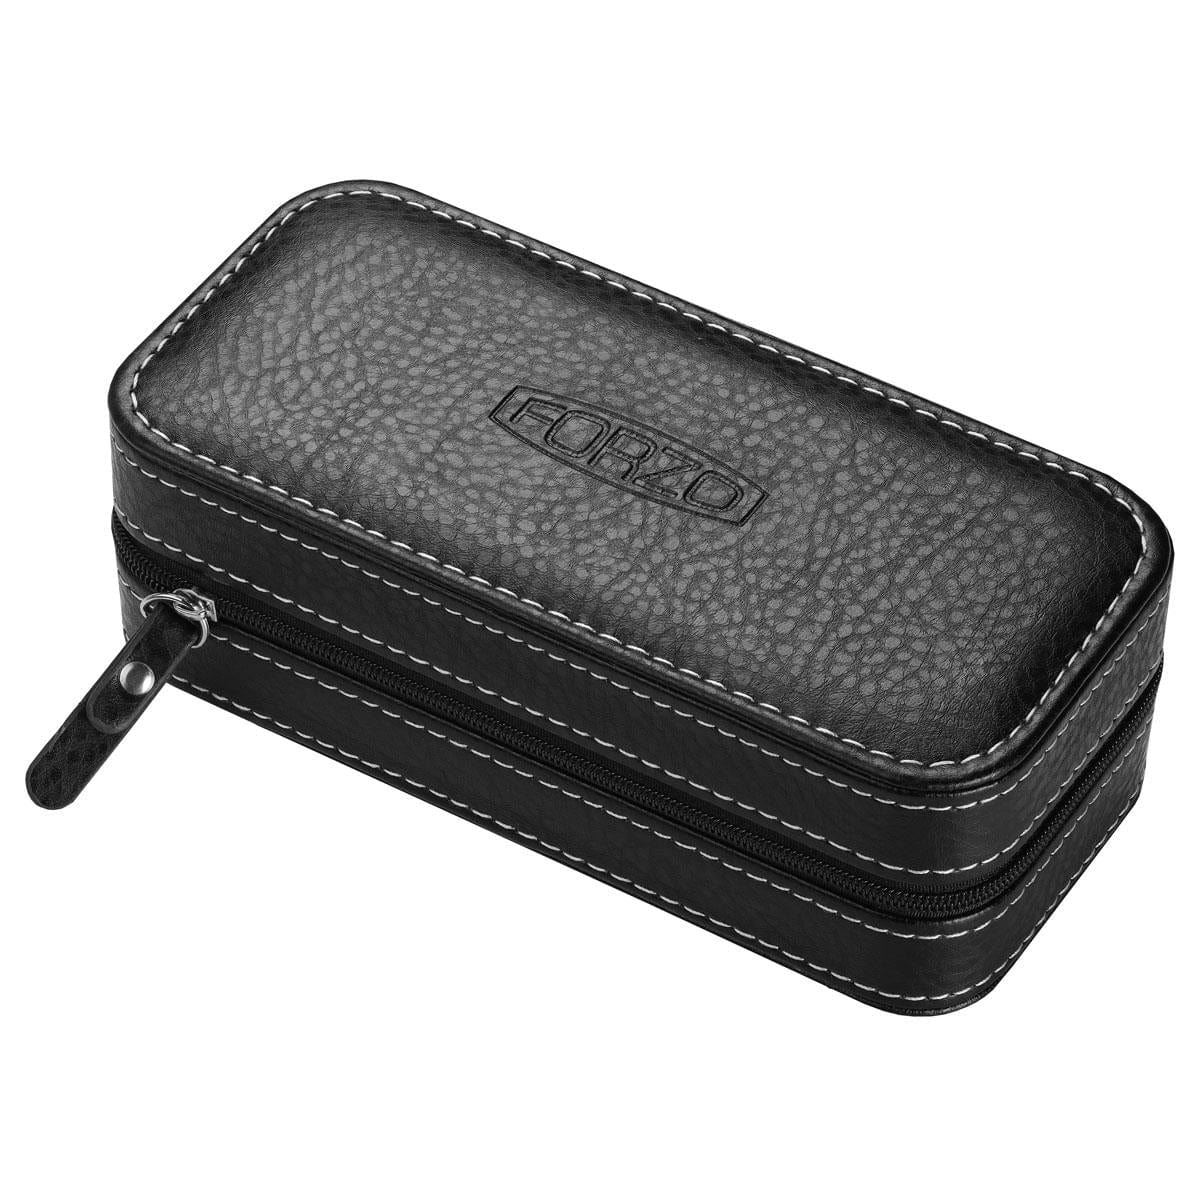 FORZO 2 Piece Soft Touch Padded Watch Case - Black